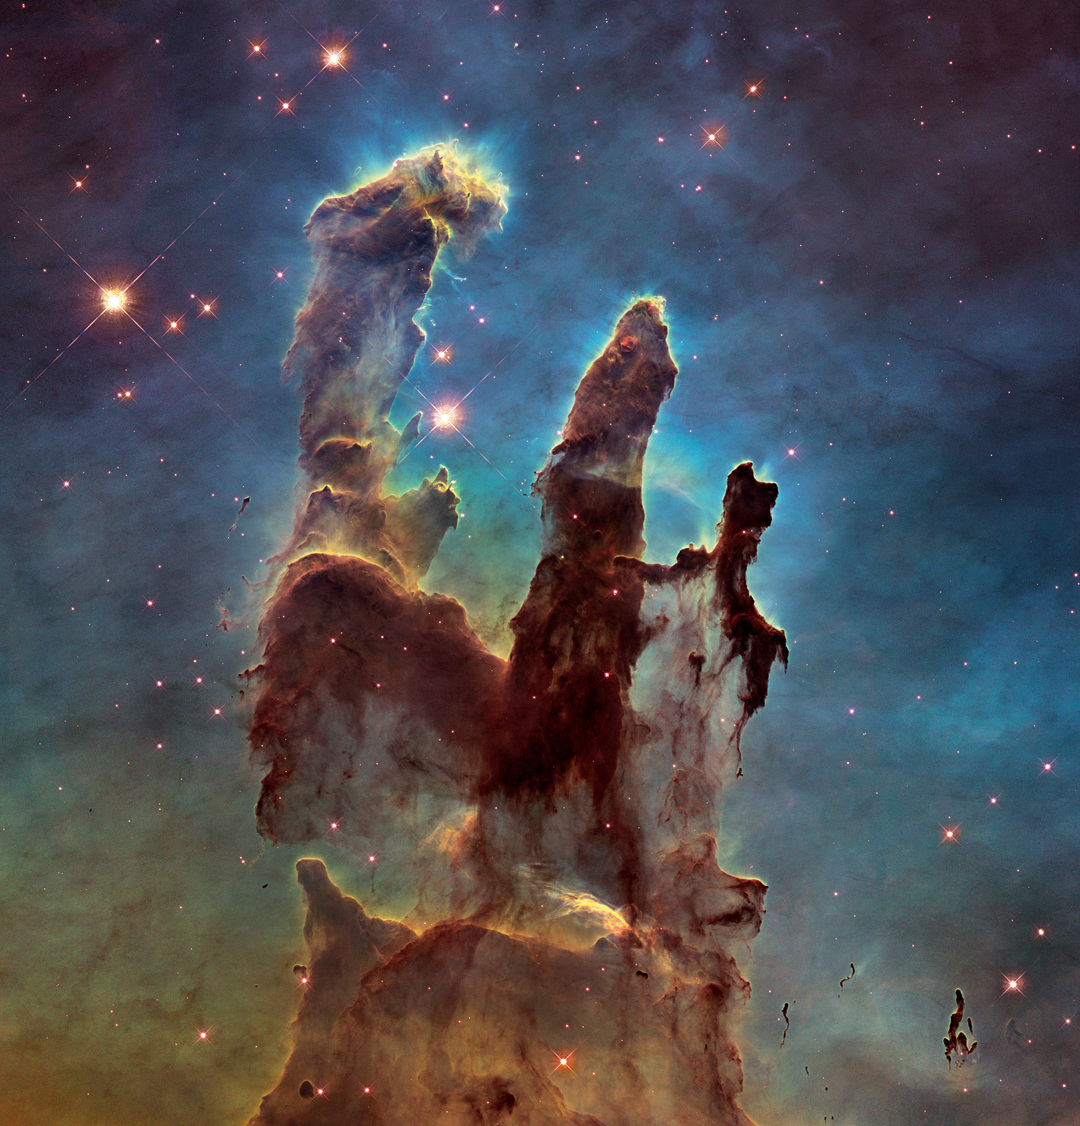 Hubble view of M16, the Eagle Nebula, an actively star-forming gaseous region 7,000 light years from Earth in the constellation Serpens. The structure shown was first recorded through Hubble by Jeff Hester and his team from Arizona State University in 1995. This view is the most detailed image yet obtained of the Eagle Nebula. As reproduced in Sun and Moon